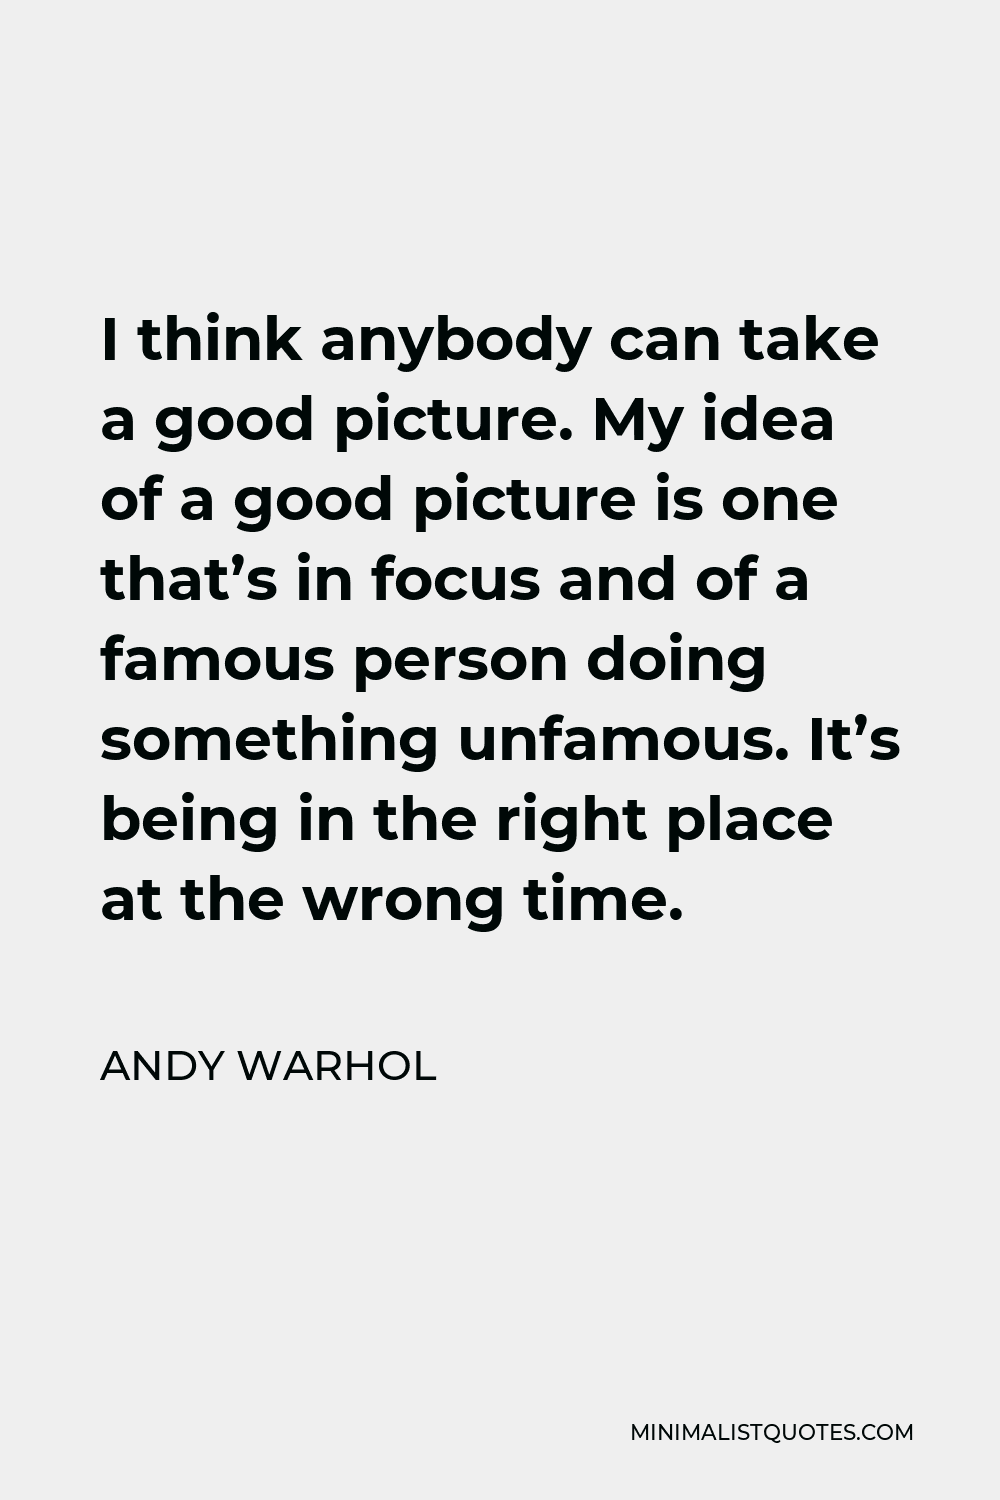 Andy Warhol Quote - I think anybody can take a good picture. My idea of a good picture is one that’s in focus and of a famous person doing something unfamous. It’s being in the right place at the wrong time.